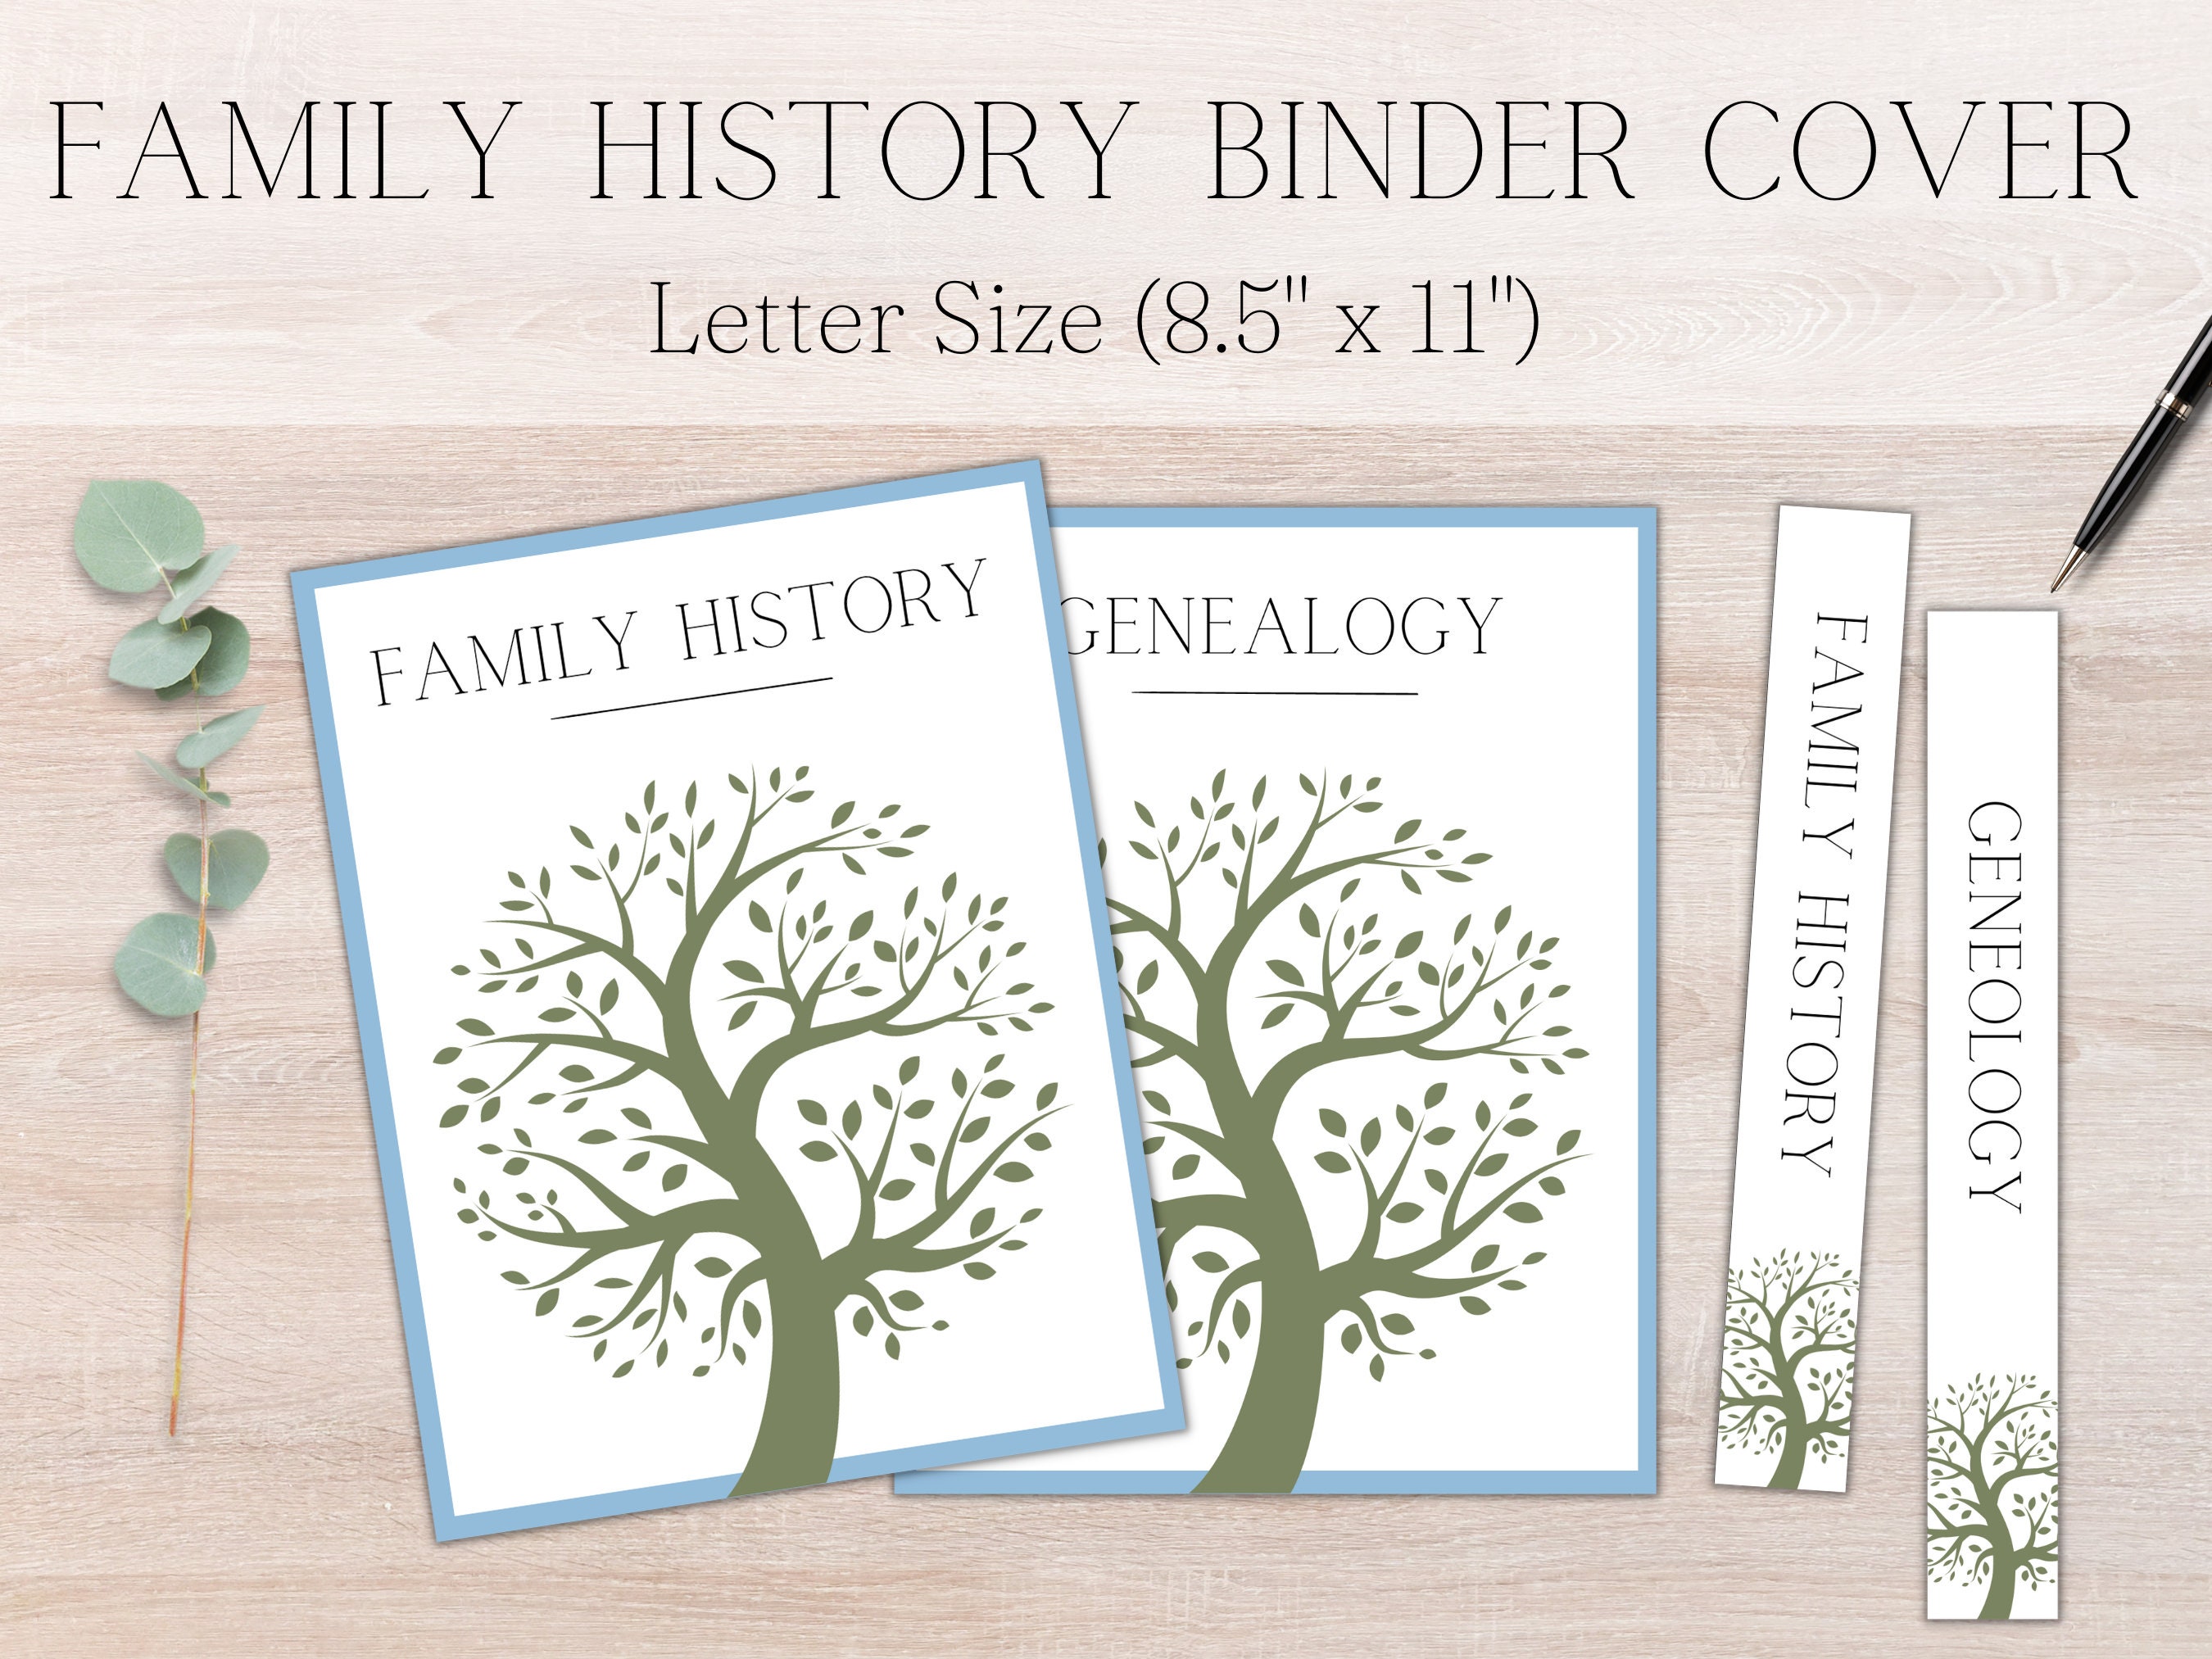 Noarlalf The Notebook Family Family Personal Into Memories to and Tree Write Ancestors?Genealogy Notebook-Handwritten Office & Stationery Spiral